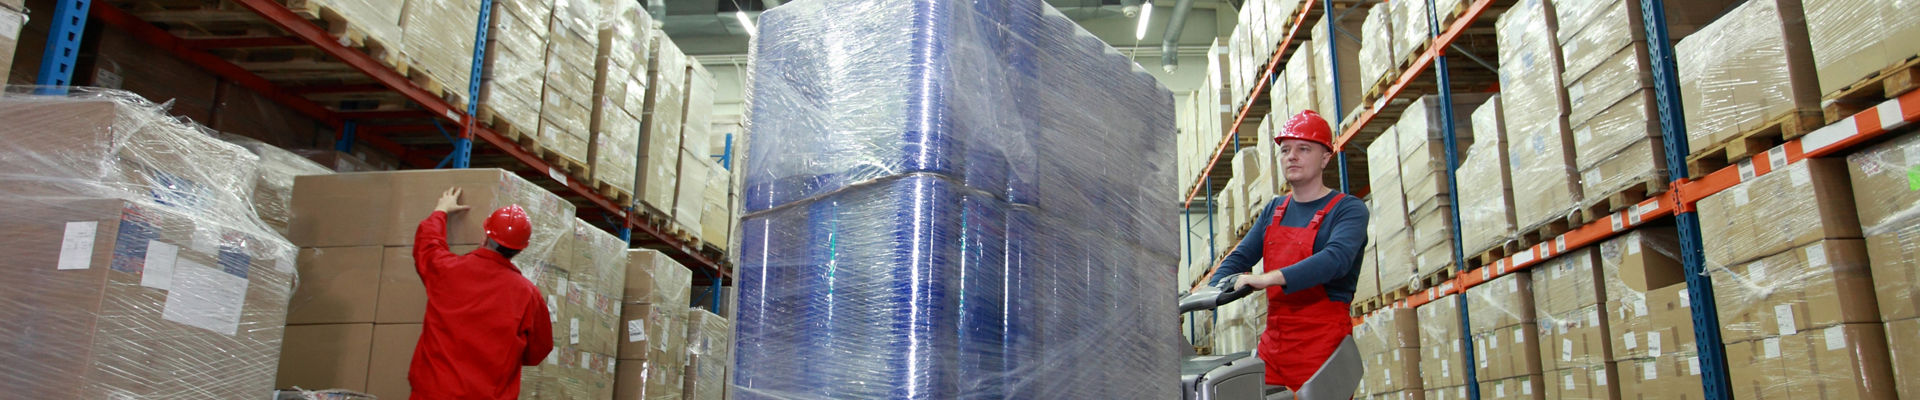 Employee moving a pallet of products wrapped in stretch film